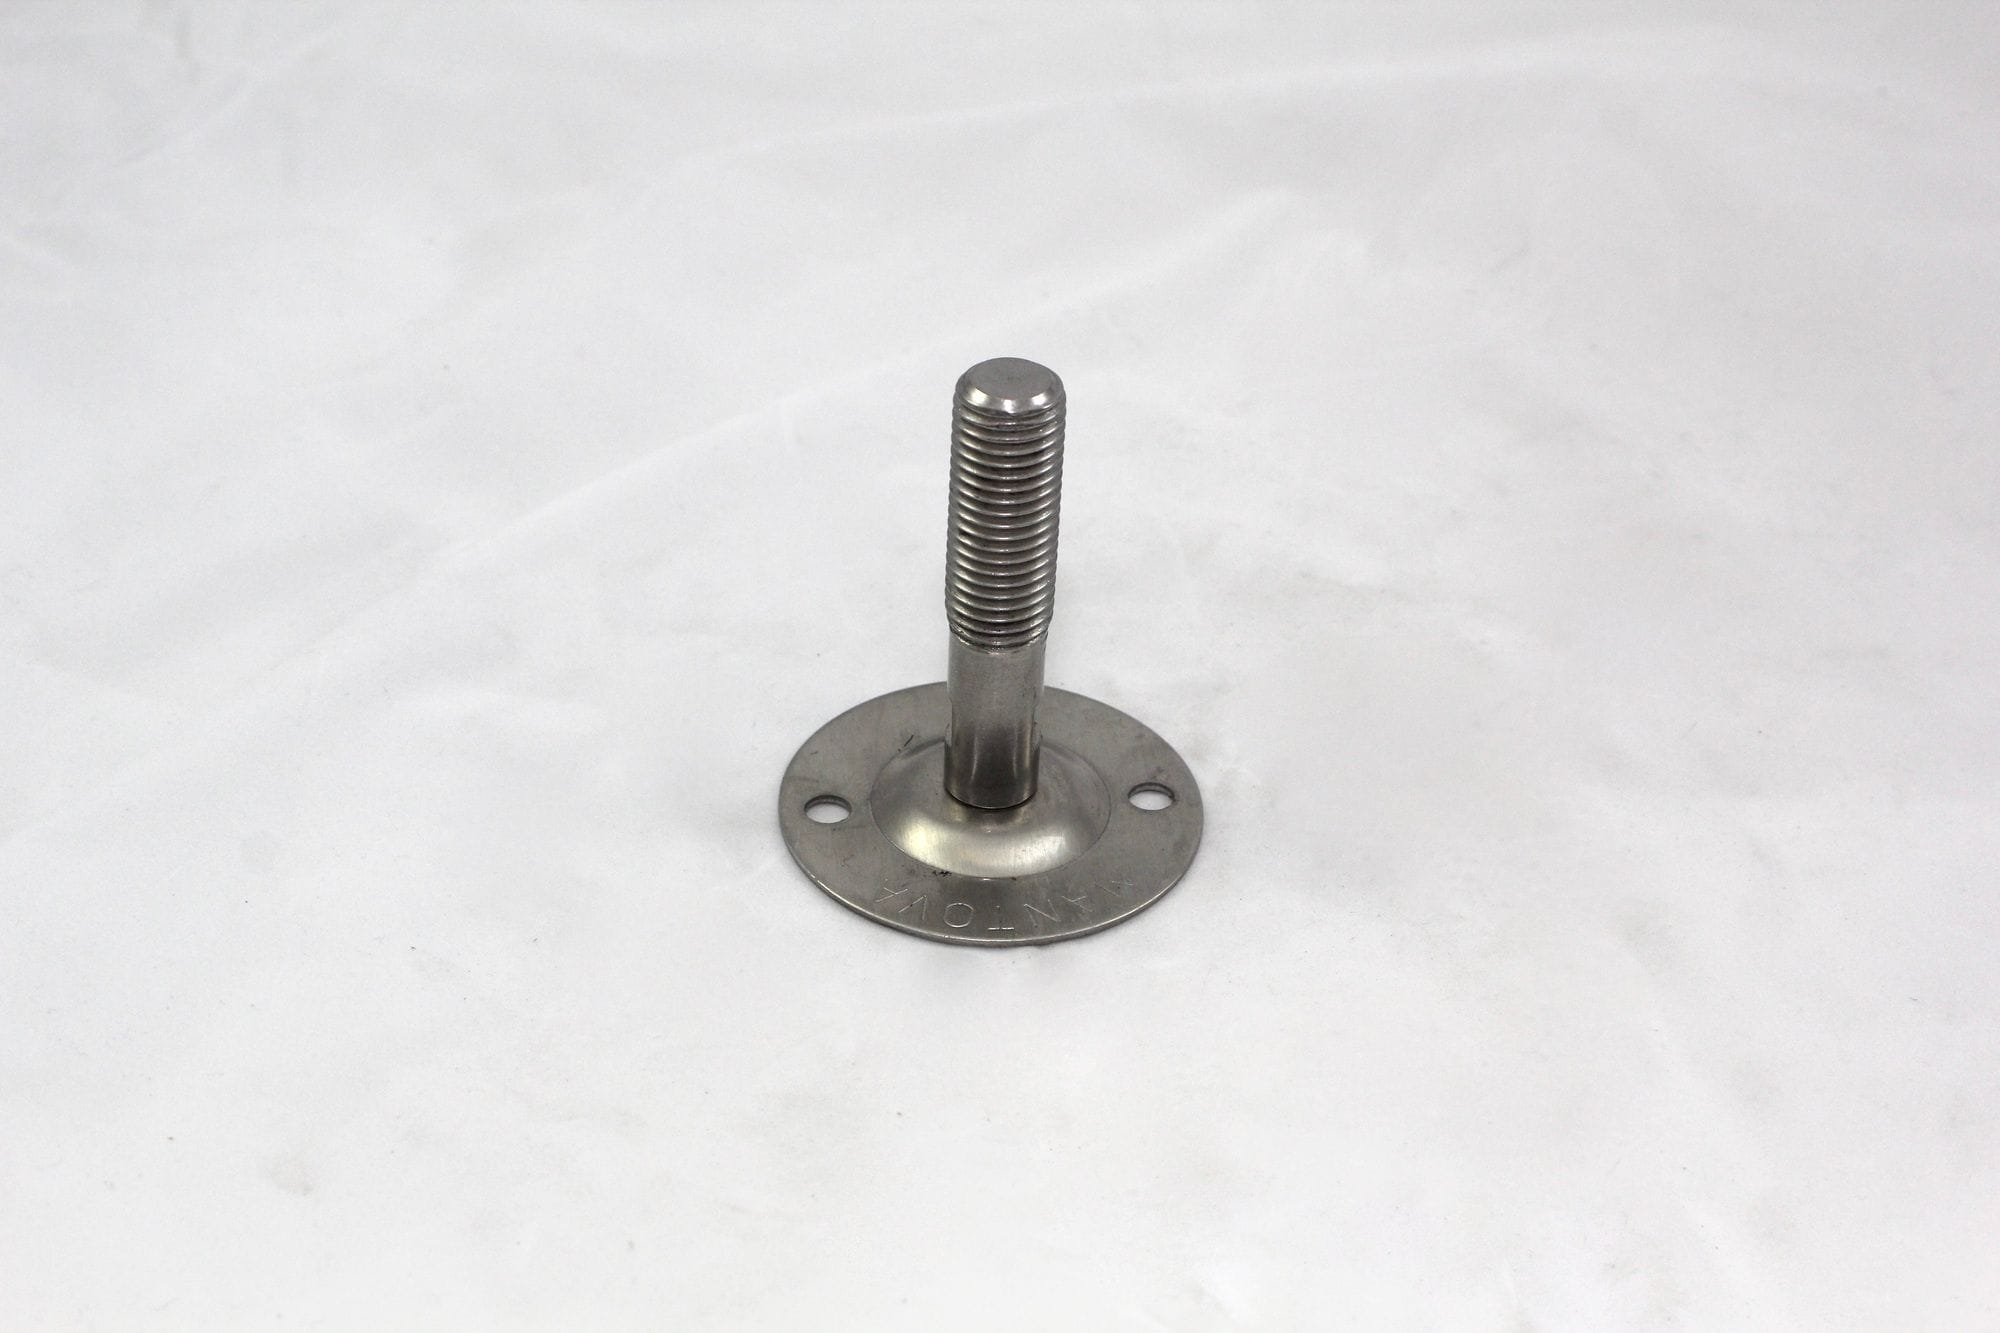 Stainless Steel Disc Foot 16mm thread x 70mm Stem x 65mm Disc